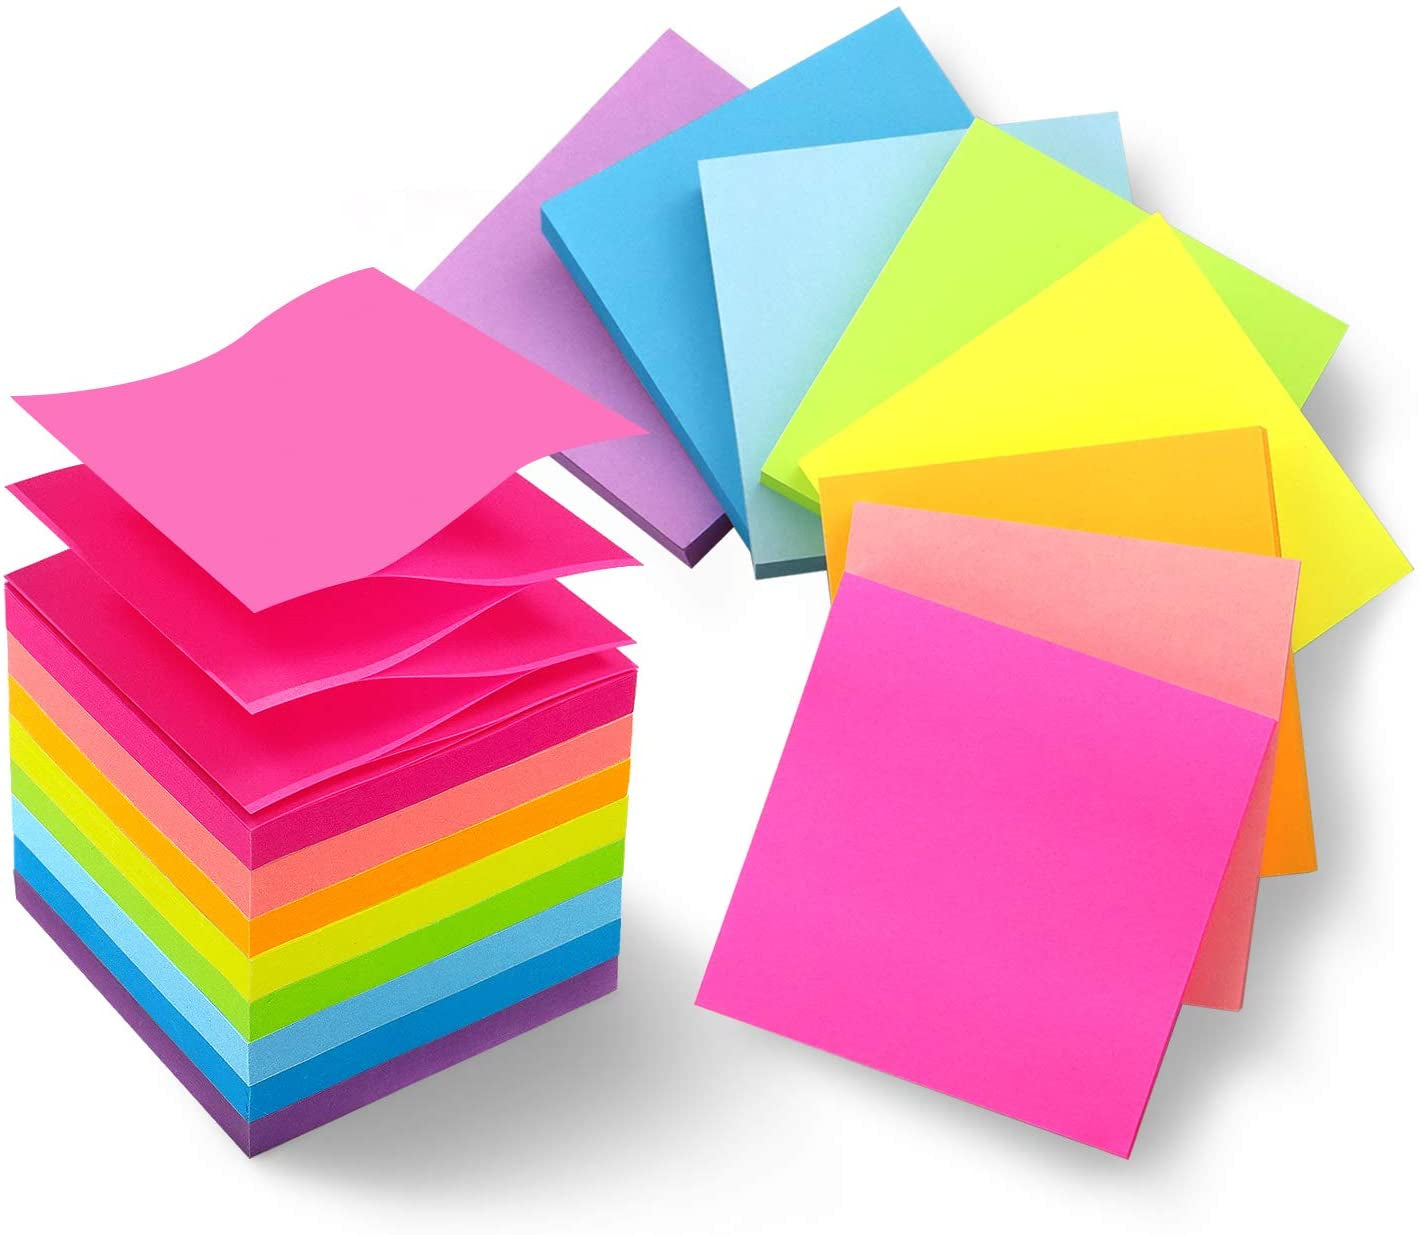 8 Pads Pop up Sticky Notes 3X3 Refills Bright Colors Self-Stick Notes Pads Super Adhesive Sticky Notes Great Value Pack